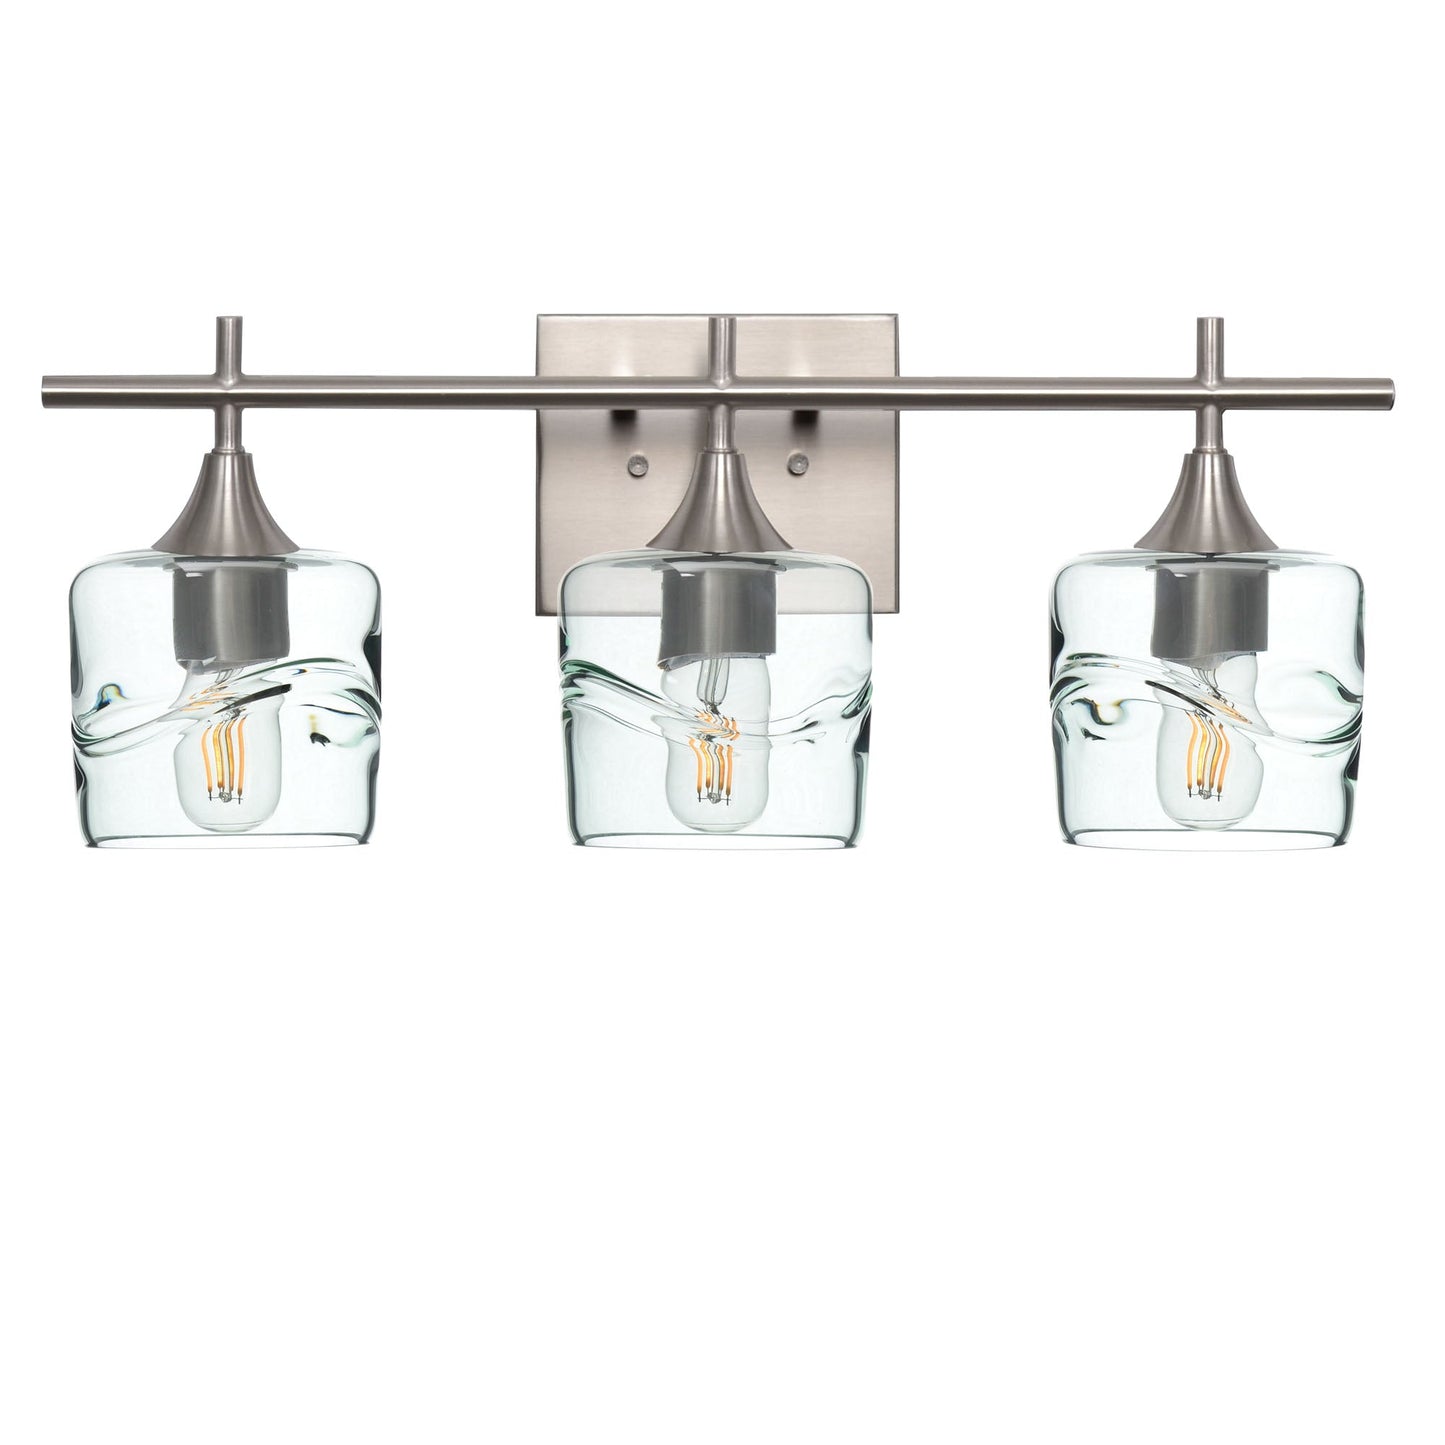 601 Swell: 3 Light Wall Vanity-Glass-Bicycle Glass Co - Hotshop-Eco Clear-Brushed Nickel-Bicycle Glass Co